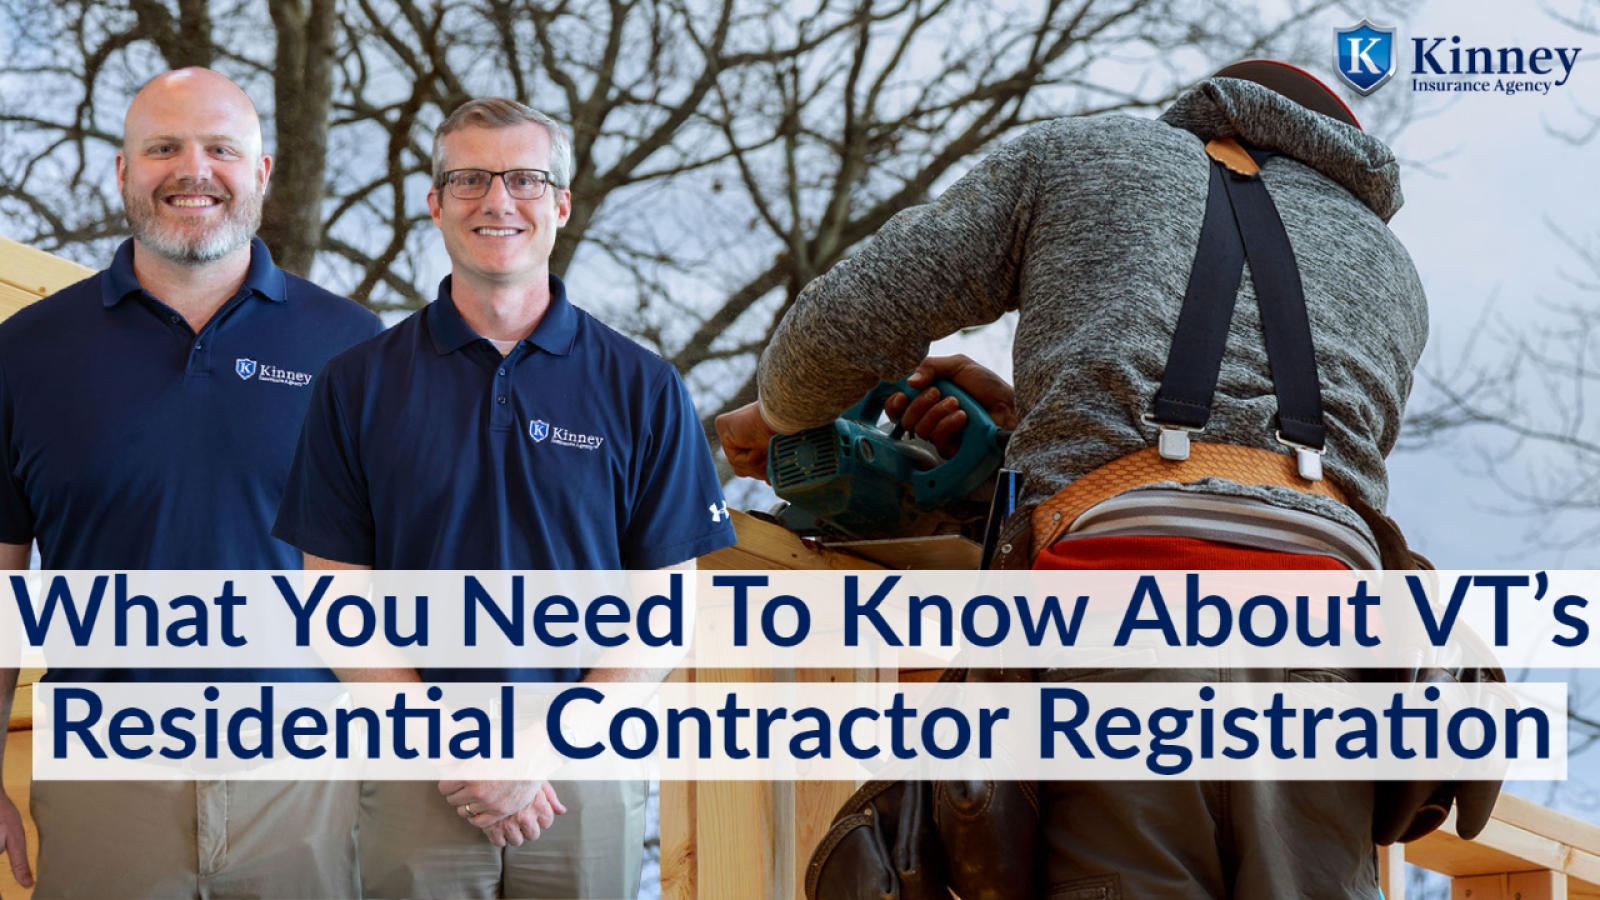 What You Need To Know About VT's Residential Contractor Registration